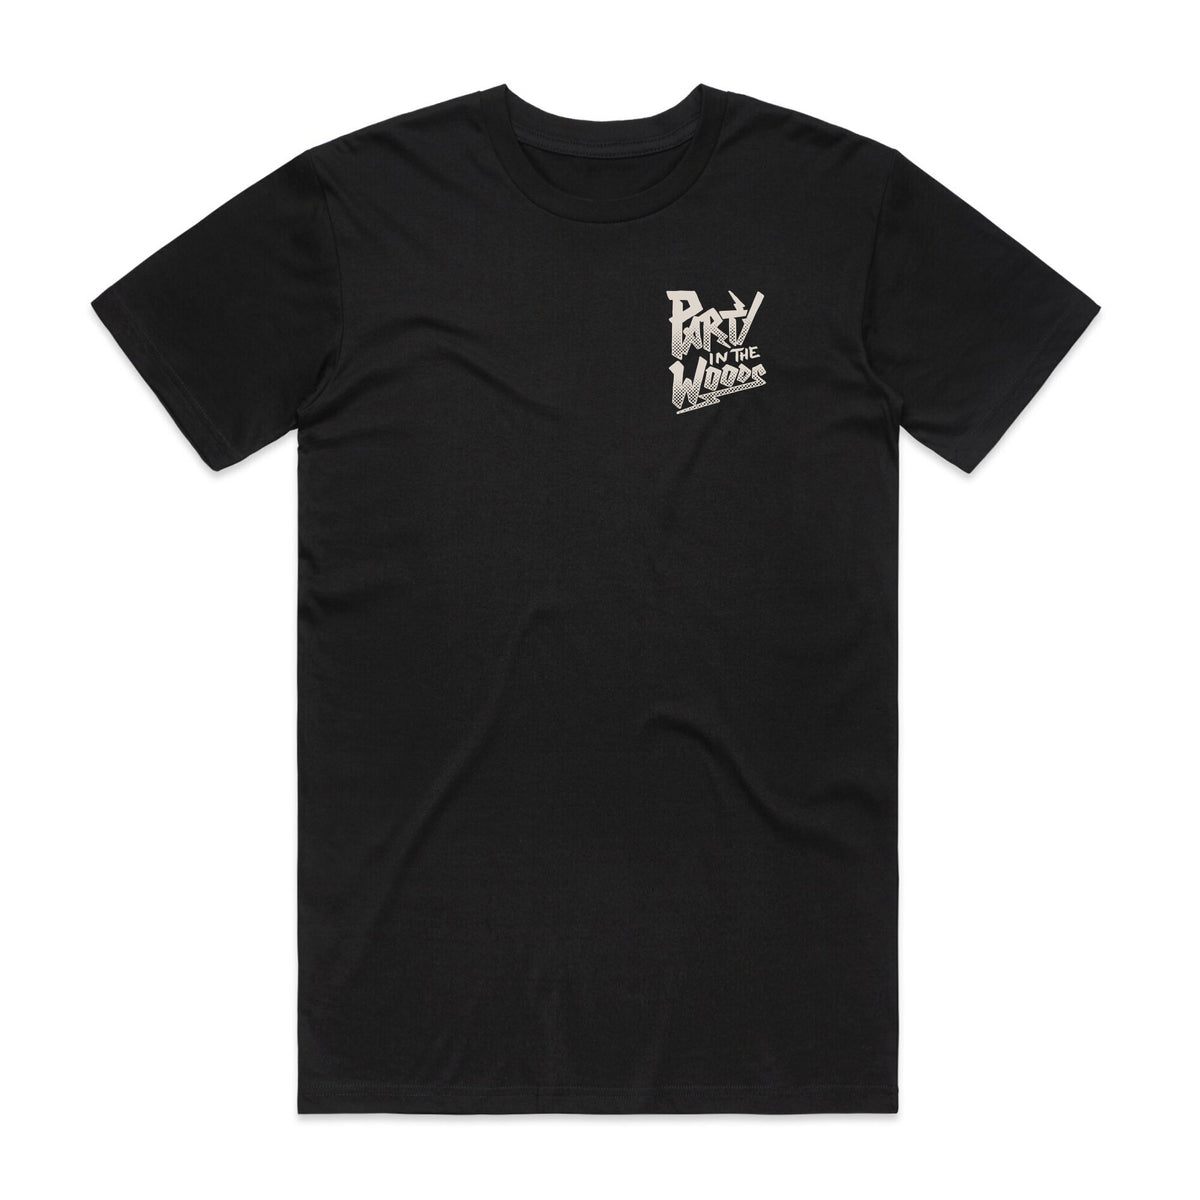 Party in the Woods tee